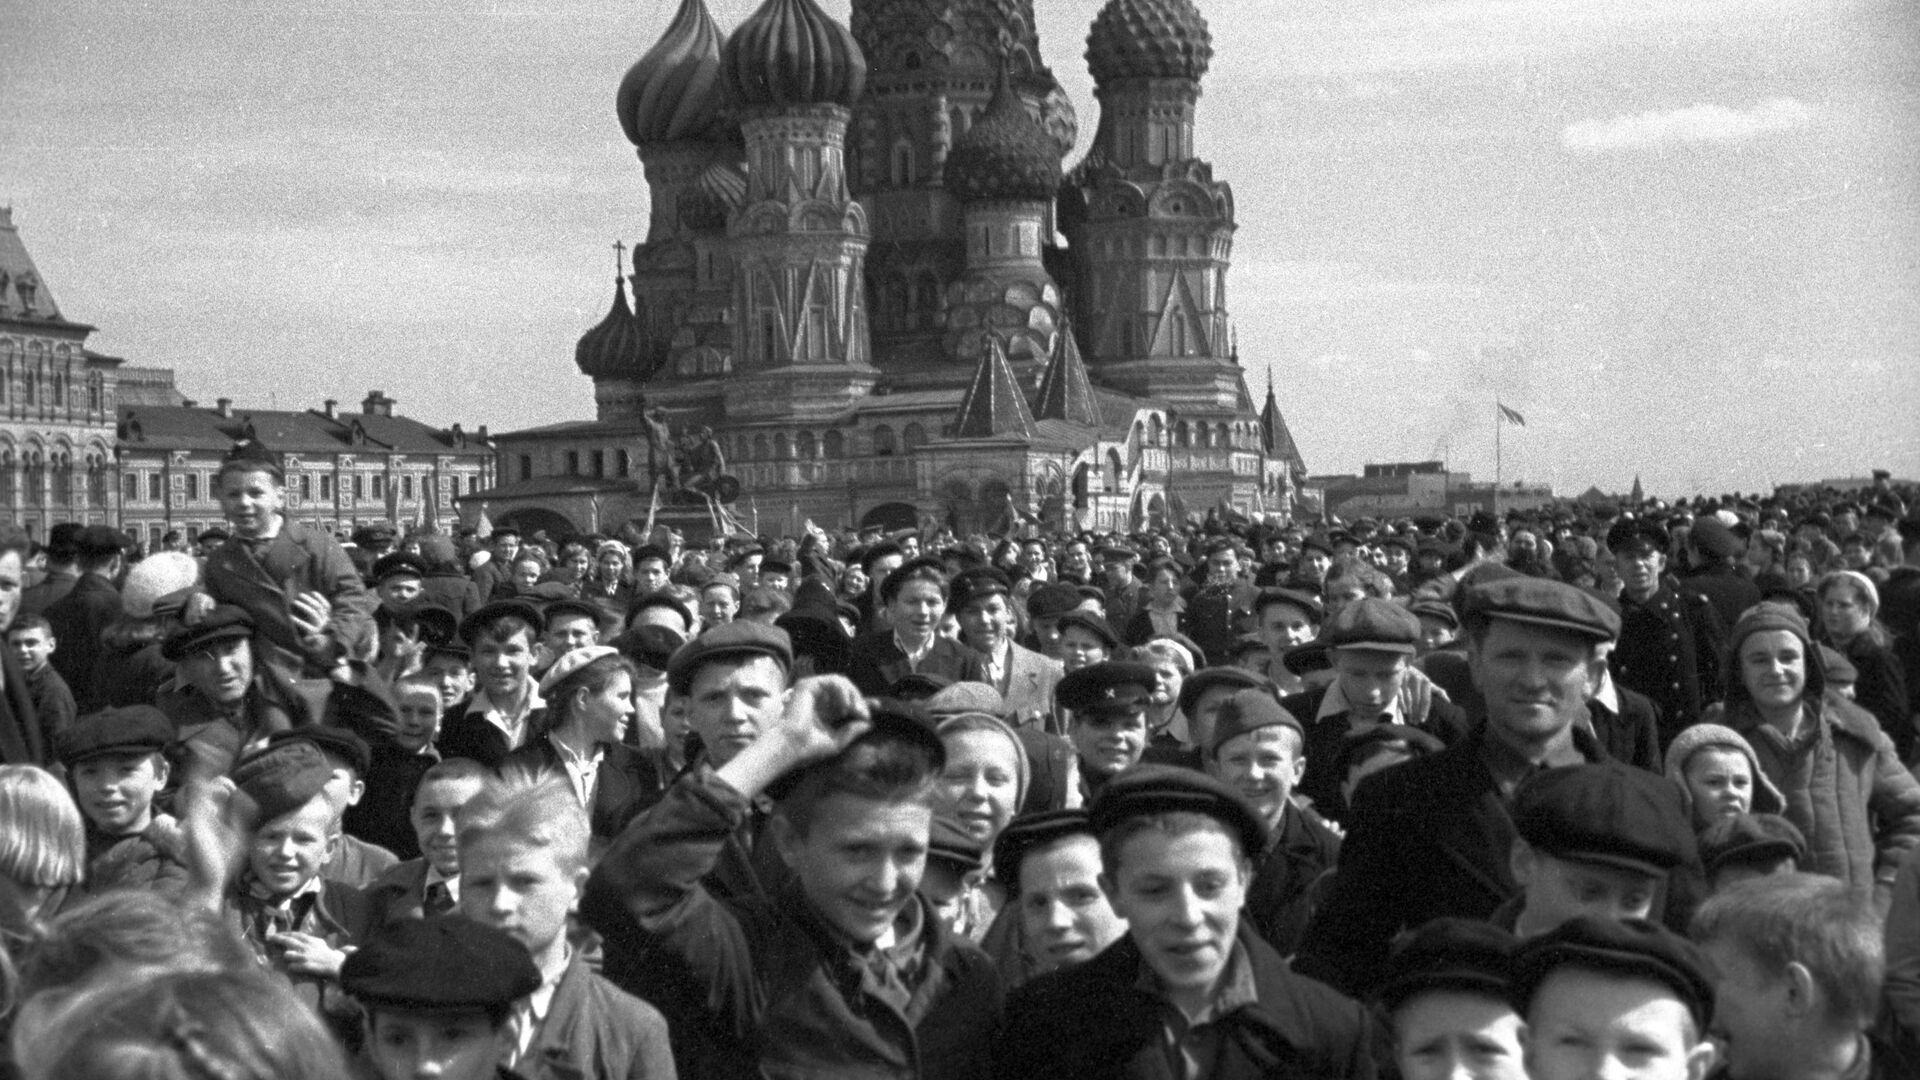 Crowds on Red Square celebrate the Soviet Union's victory over Nazi Germany in Great Patriotic War (1941-1945) - Sputnik International, 1920, 22.06.2021